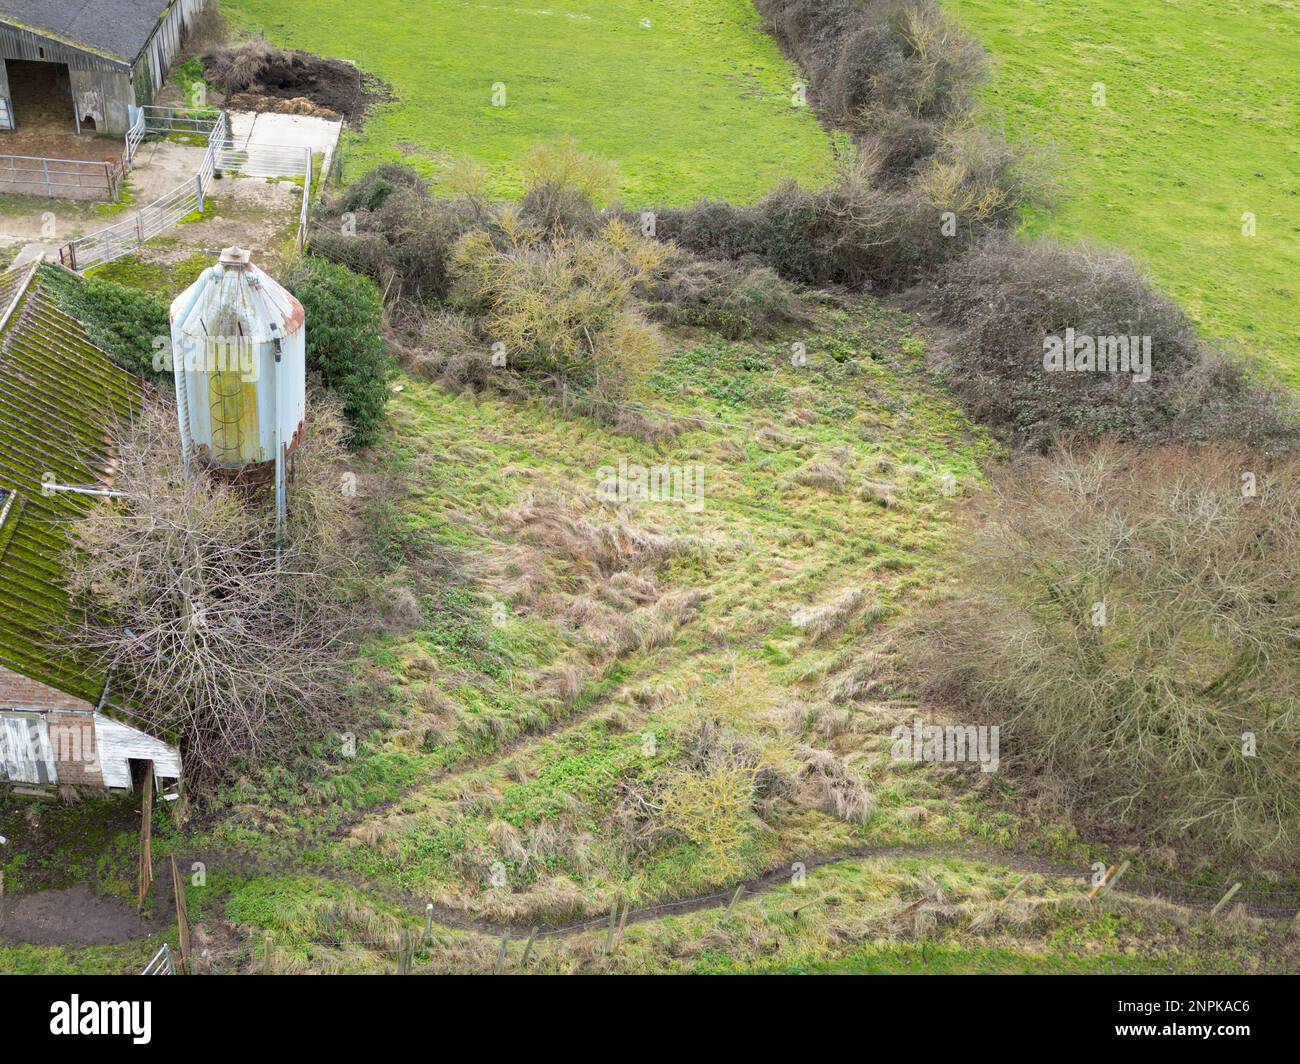 Aerial view of a now derelict dairy farm showing the large metallic grain hopper and some barn sheds. Stock Photo